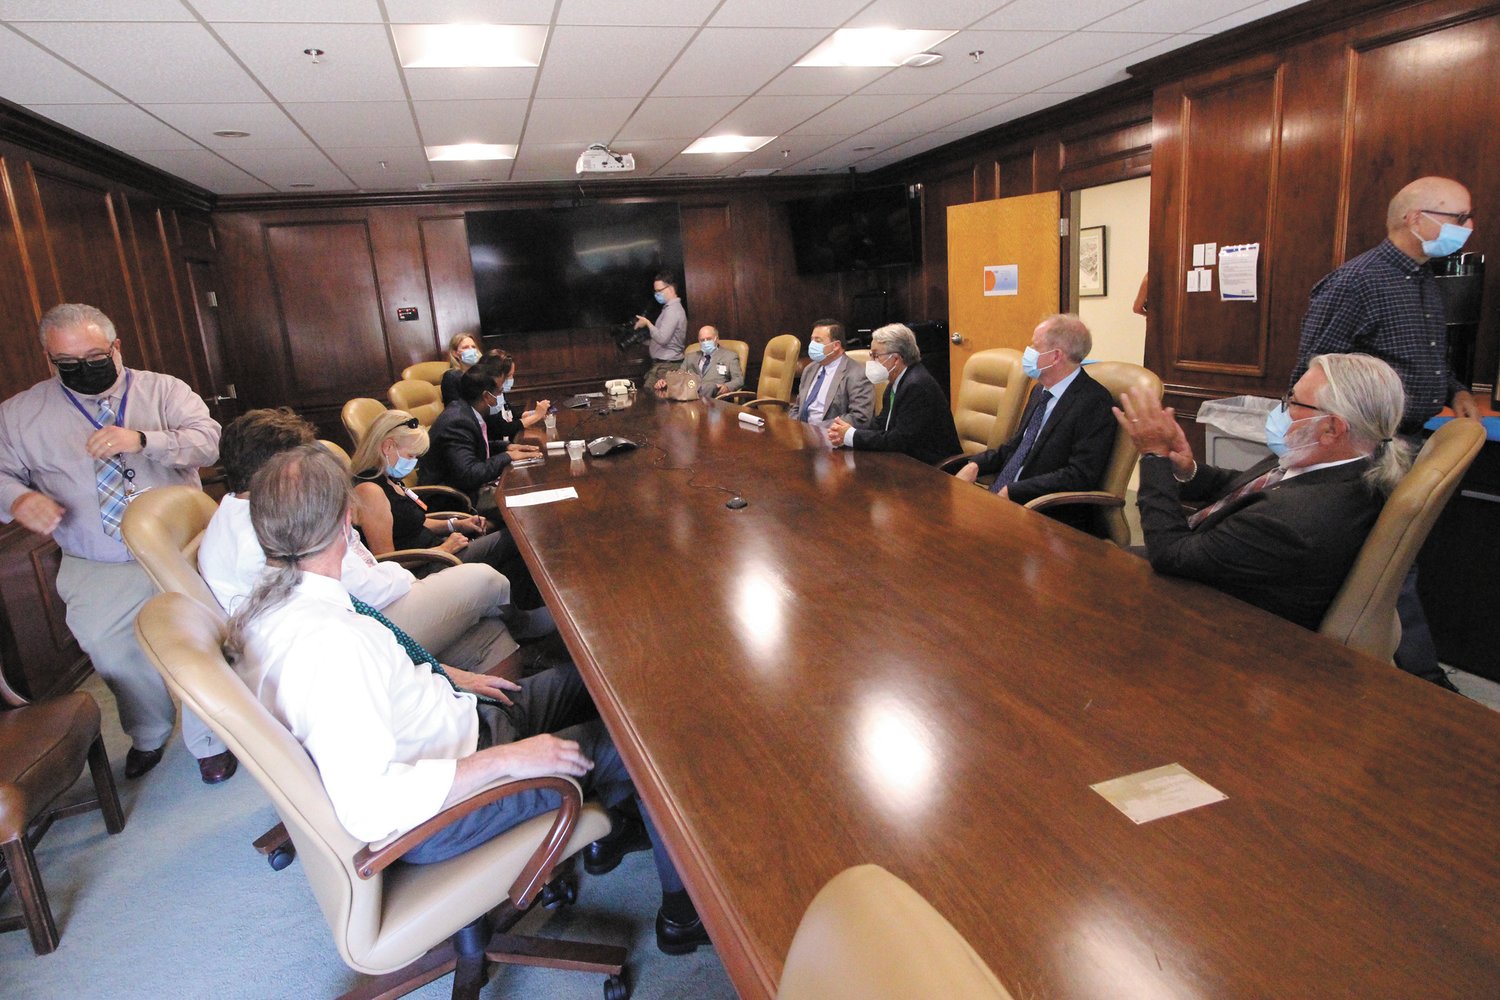 TABLE TALK: Prior to a tour of Kent Hospital, Speaker Shekarchi met with CNE and union leaders at the Kent board room.